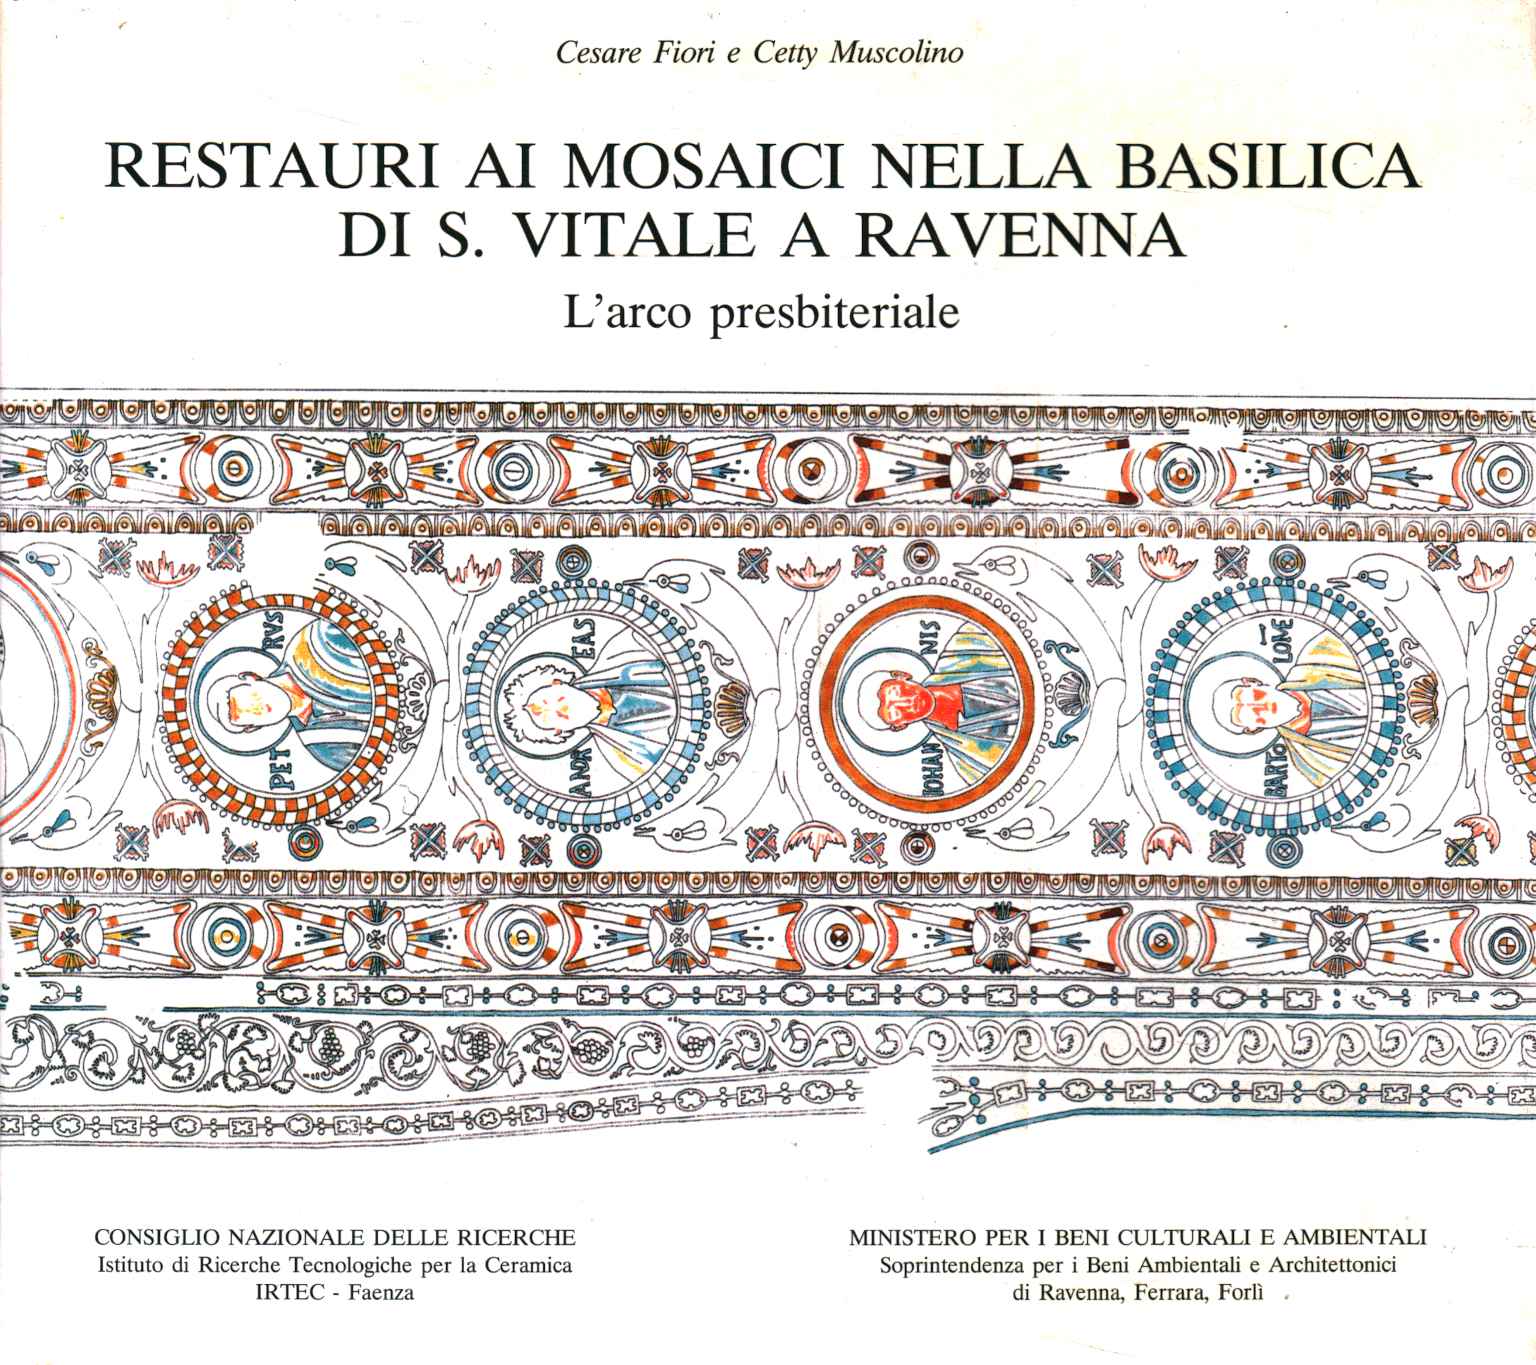 Restorations to the mosaics in the Basilica of